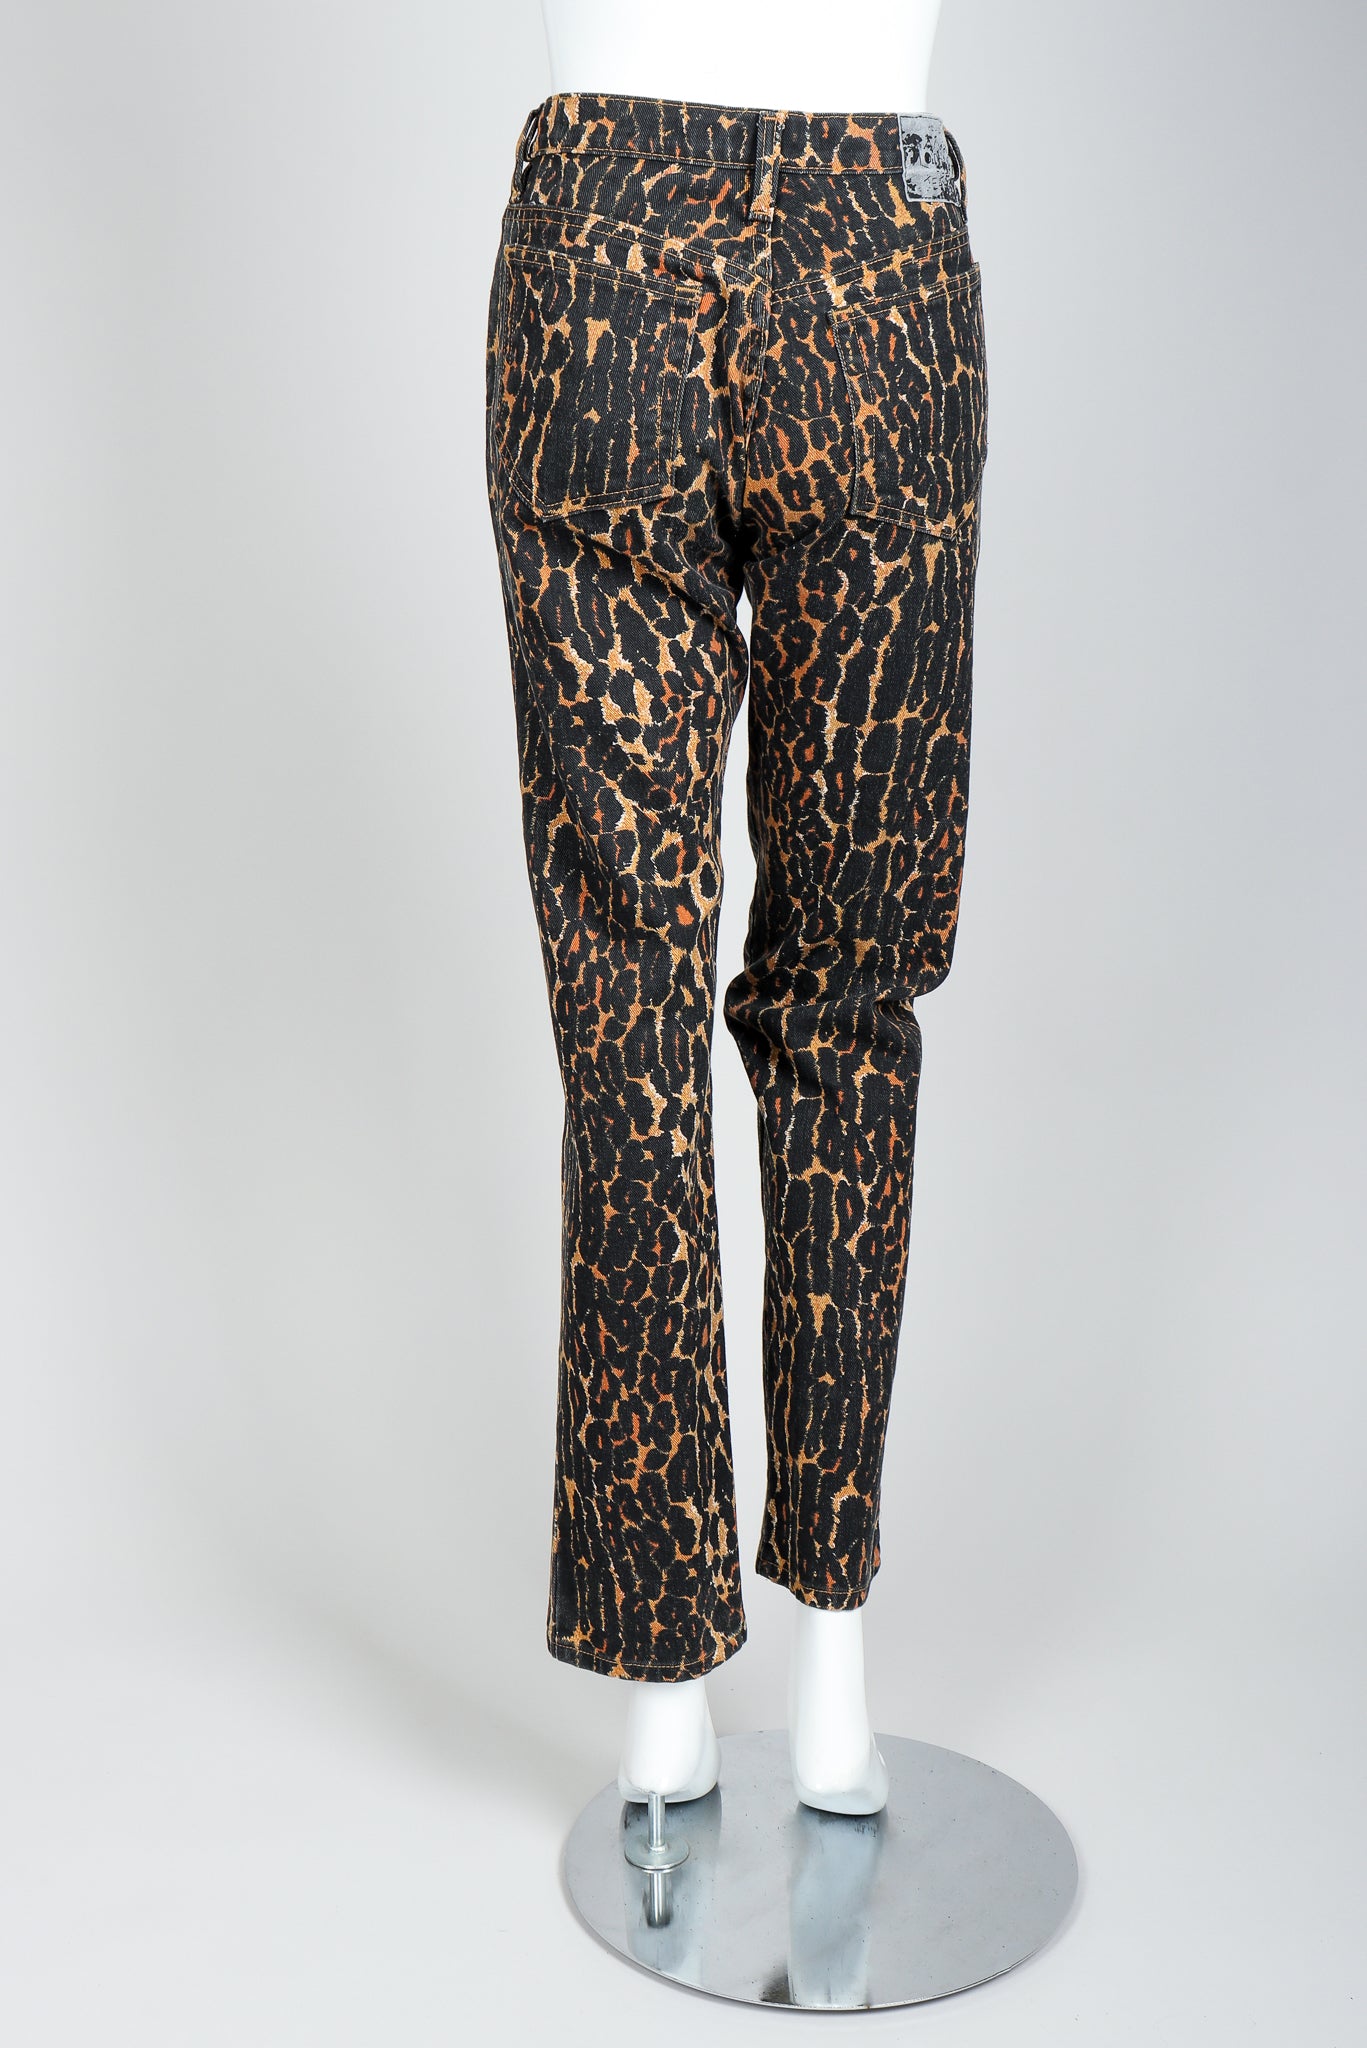 Recess Vintage Todd Oldham Leopard Print Jean On Mannequin, Back View